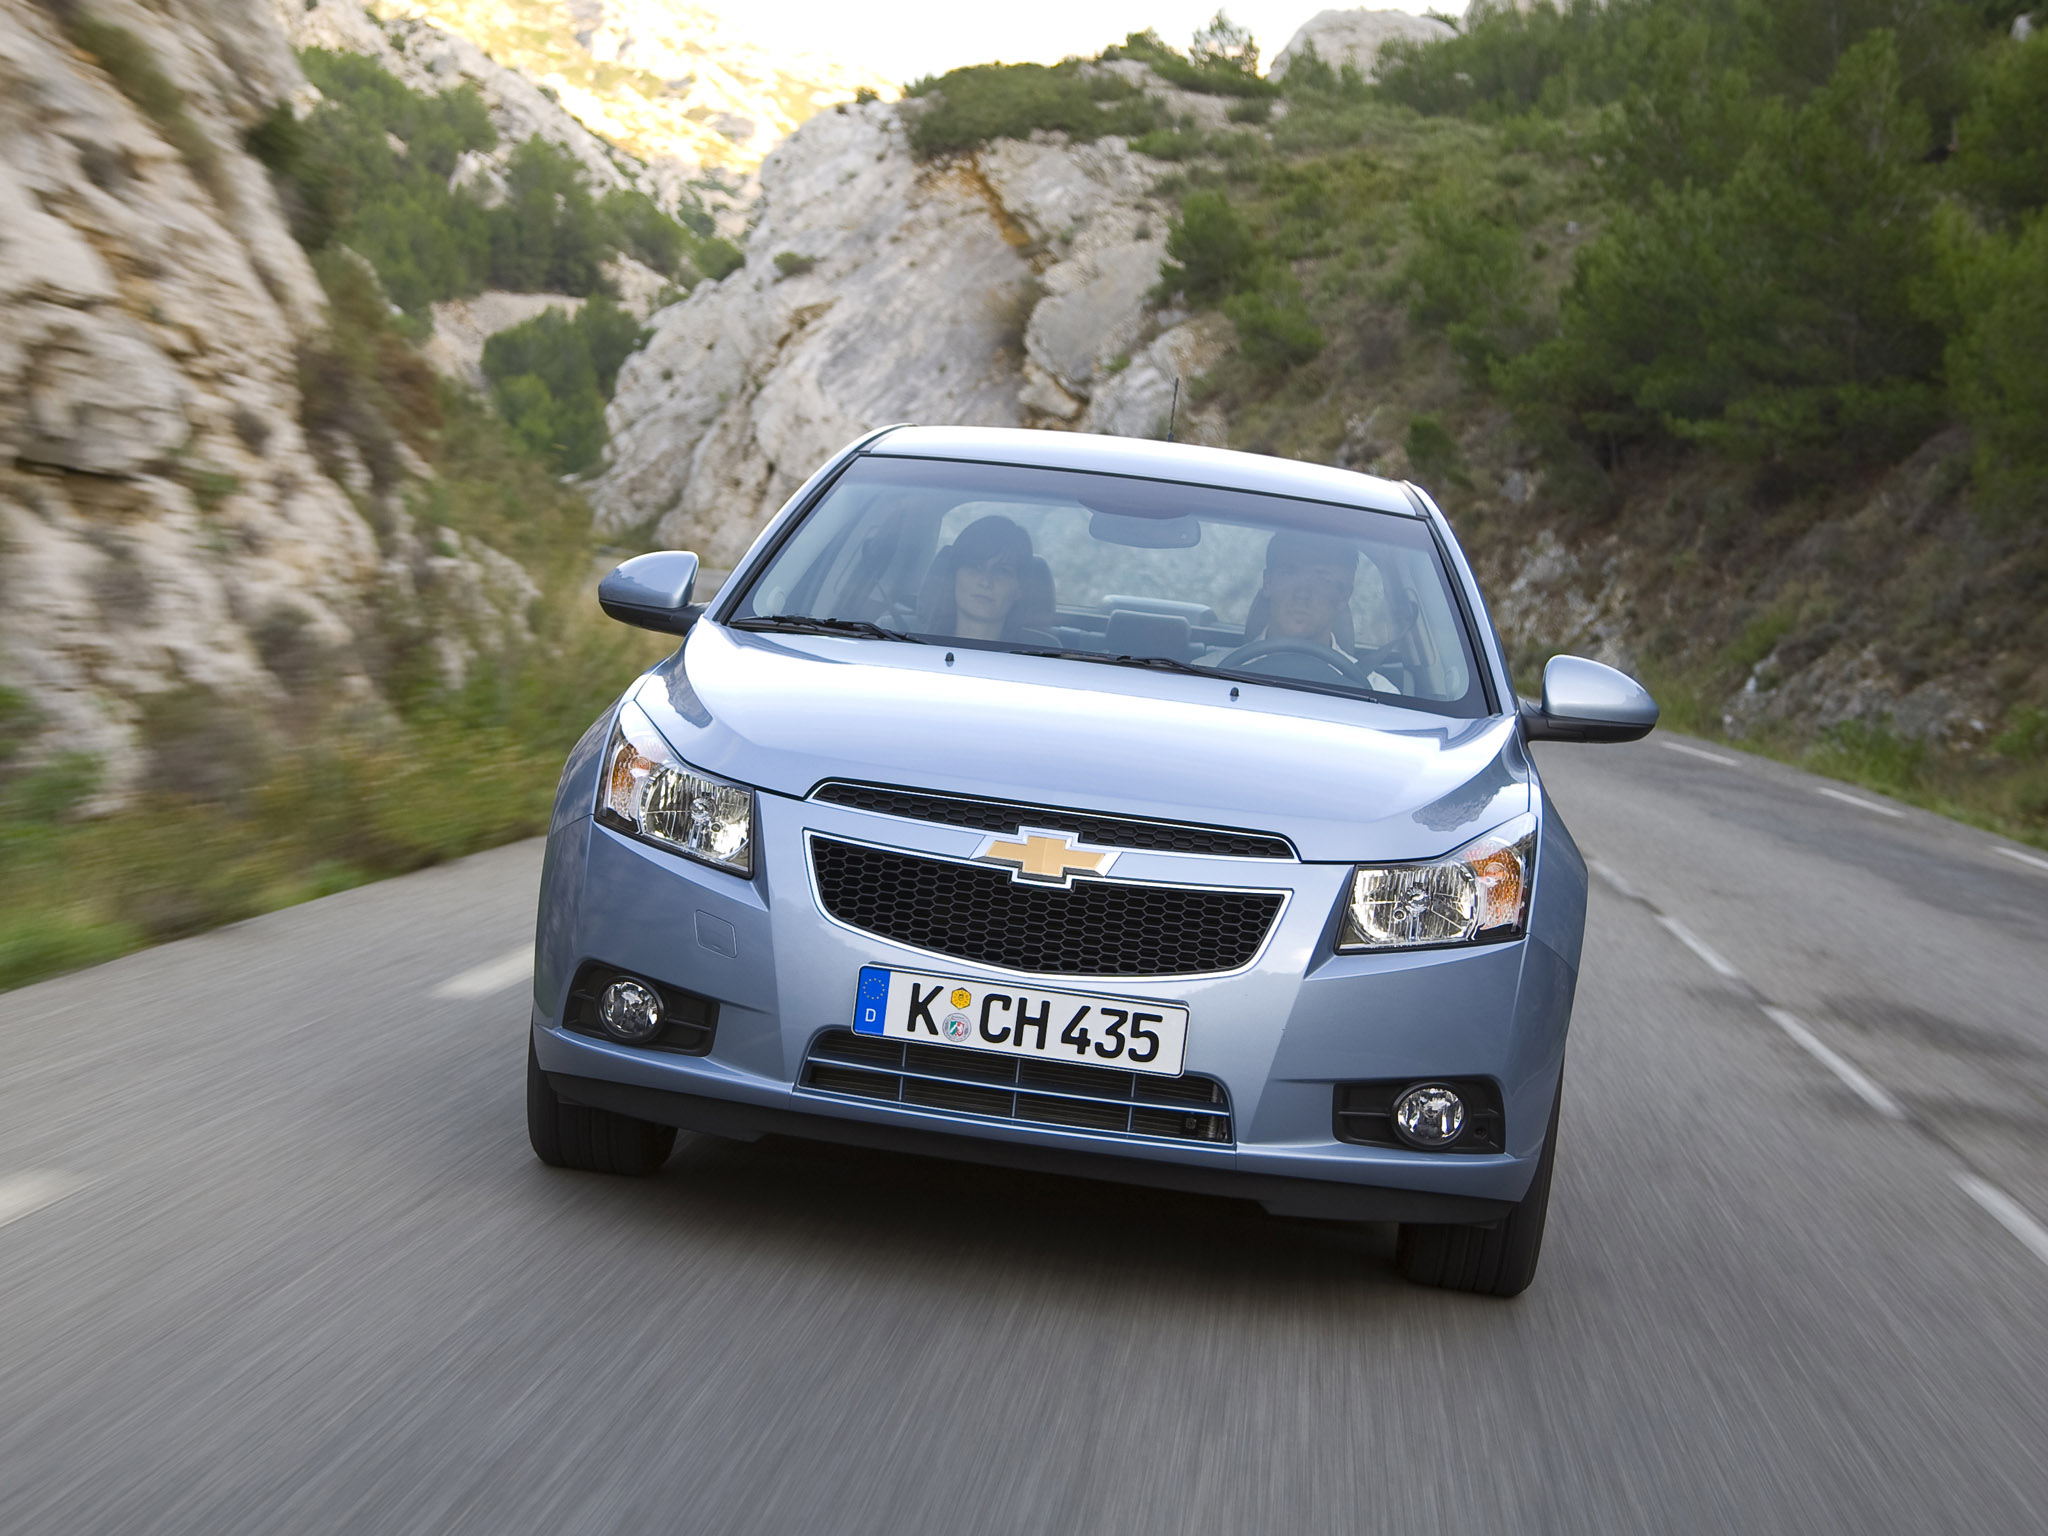 Car in pictures car photo gallery » Chevrolet Cruze 2009